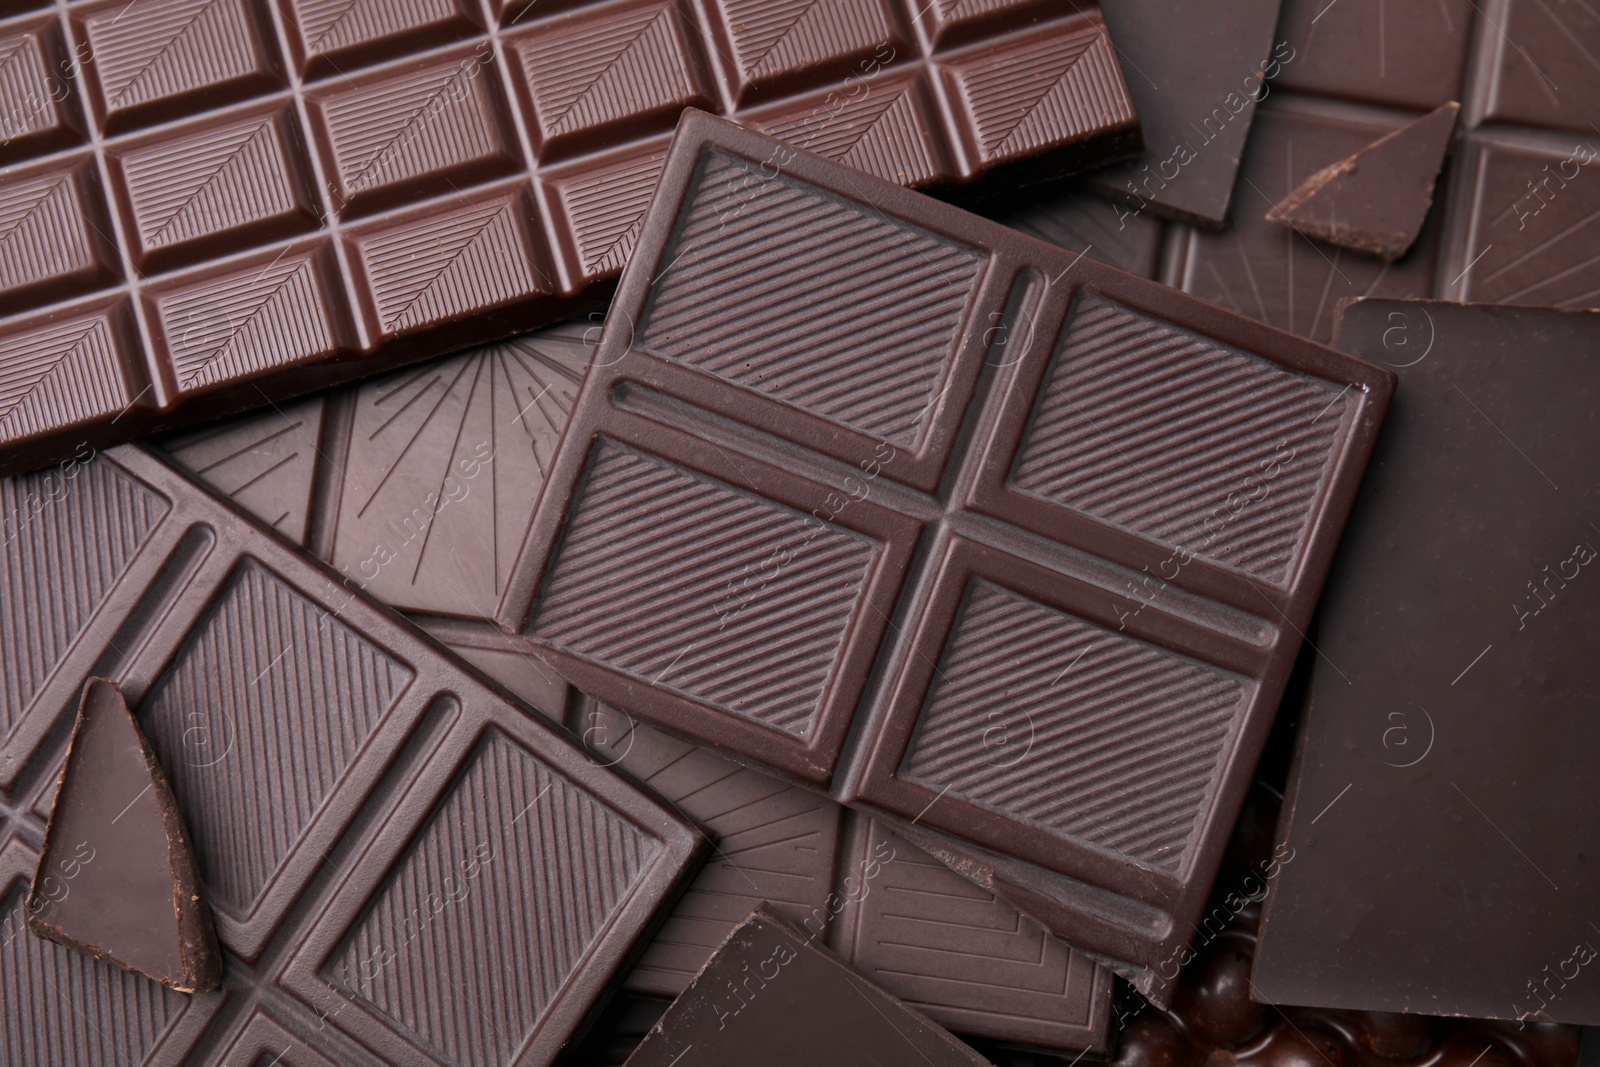 Photo of Many tasty chocolate bars as background, top view